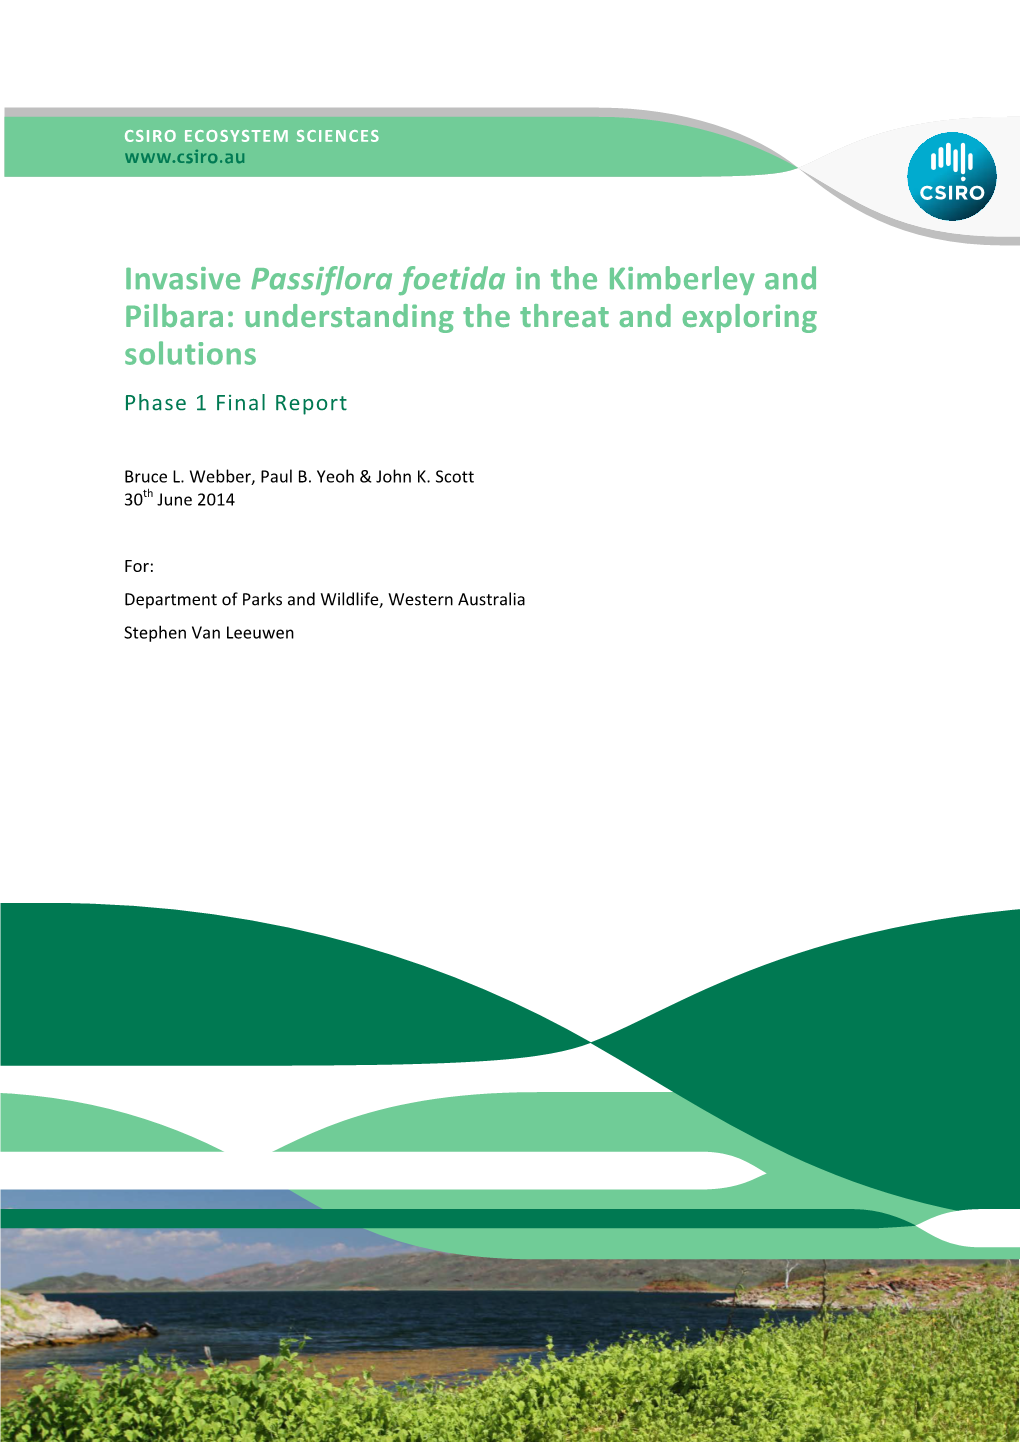 Invasive Passiflora Foetida in the Kimberley and Pilbara: Understanding the Threat and Exploring Solutions Phase 1 Final Report